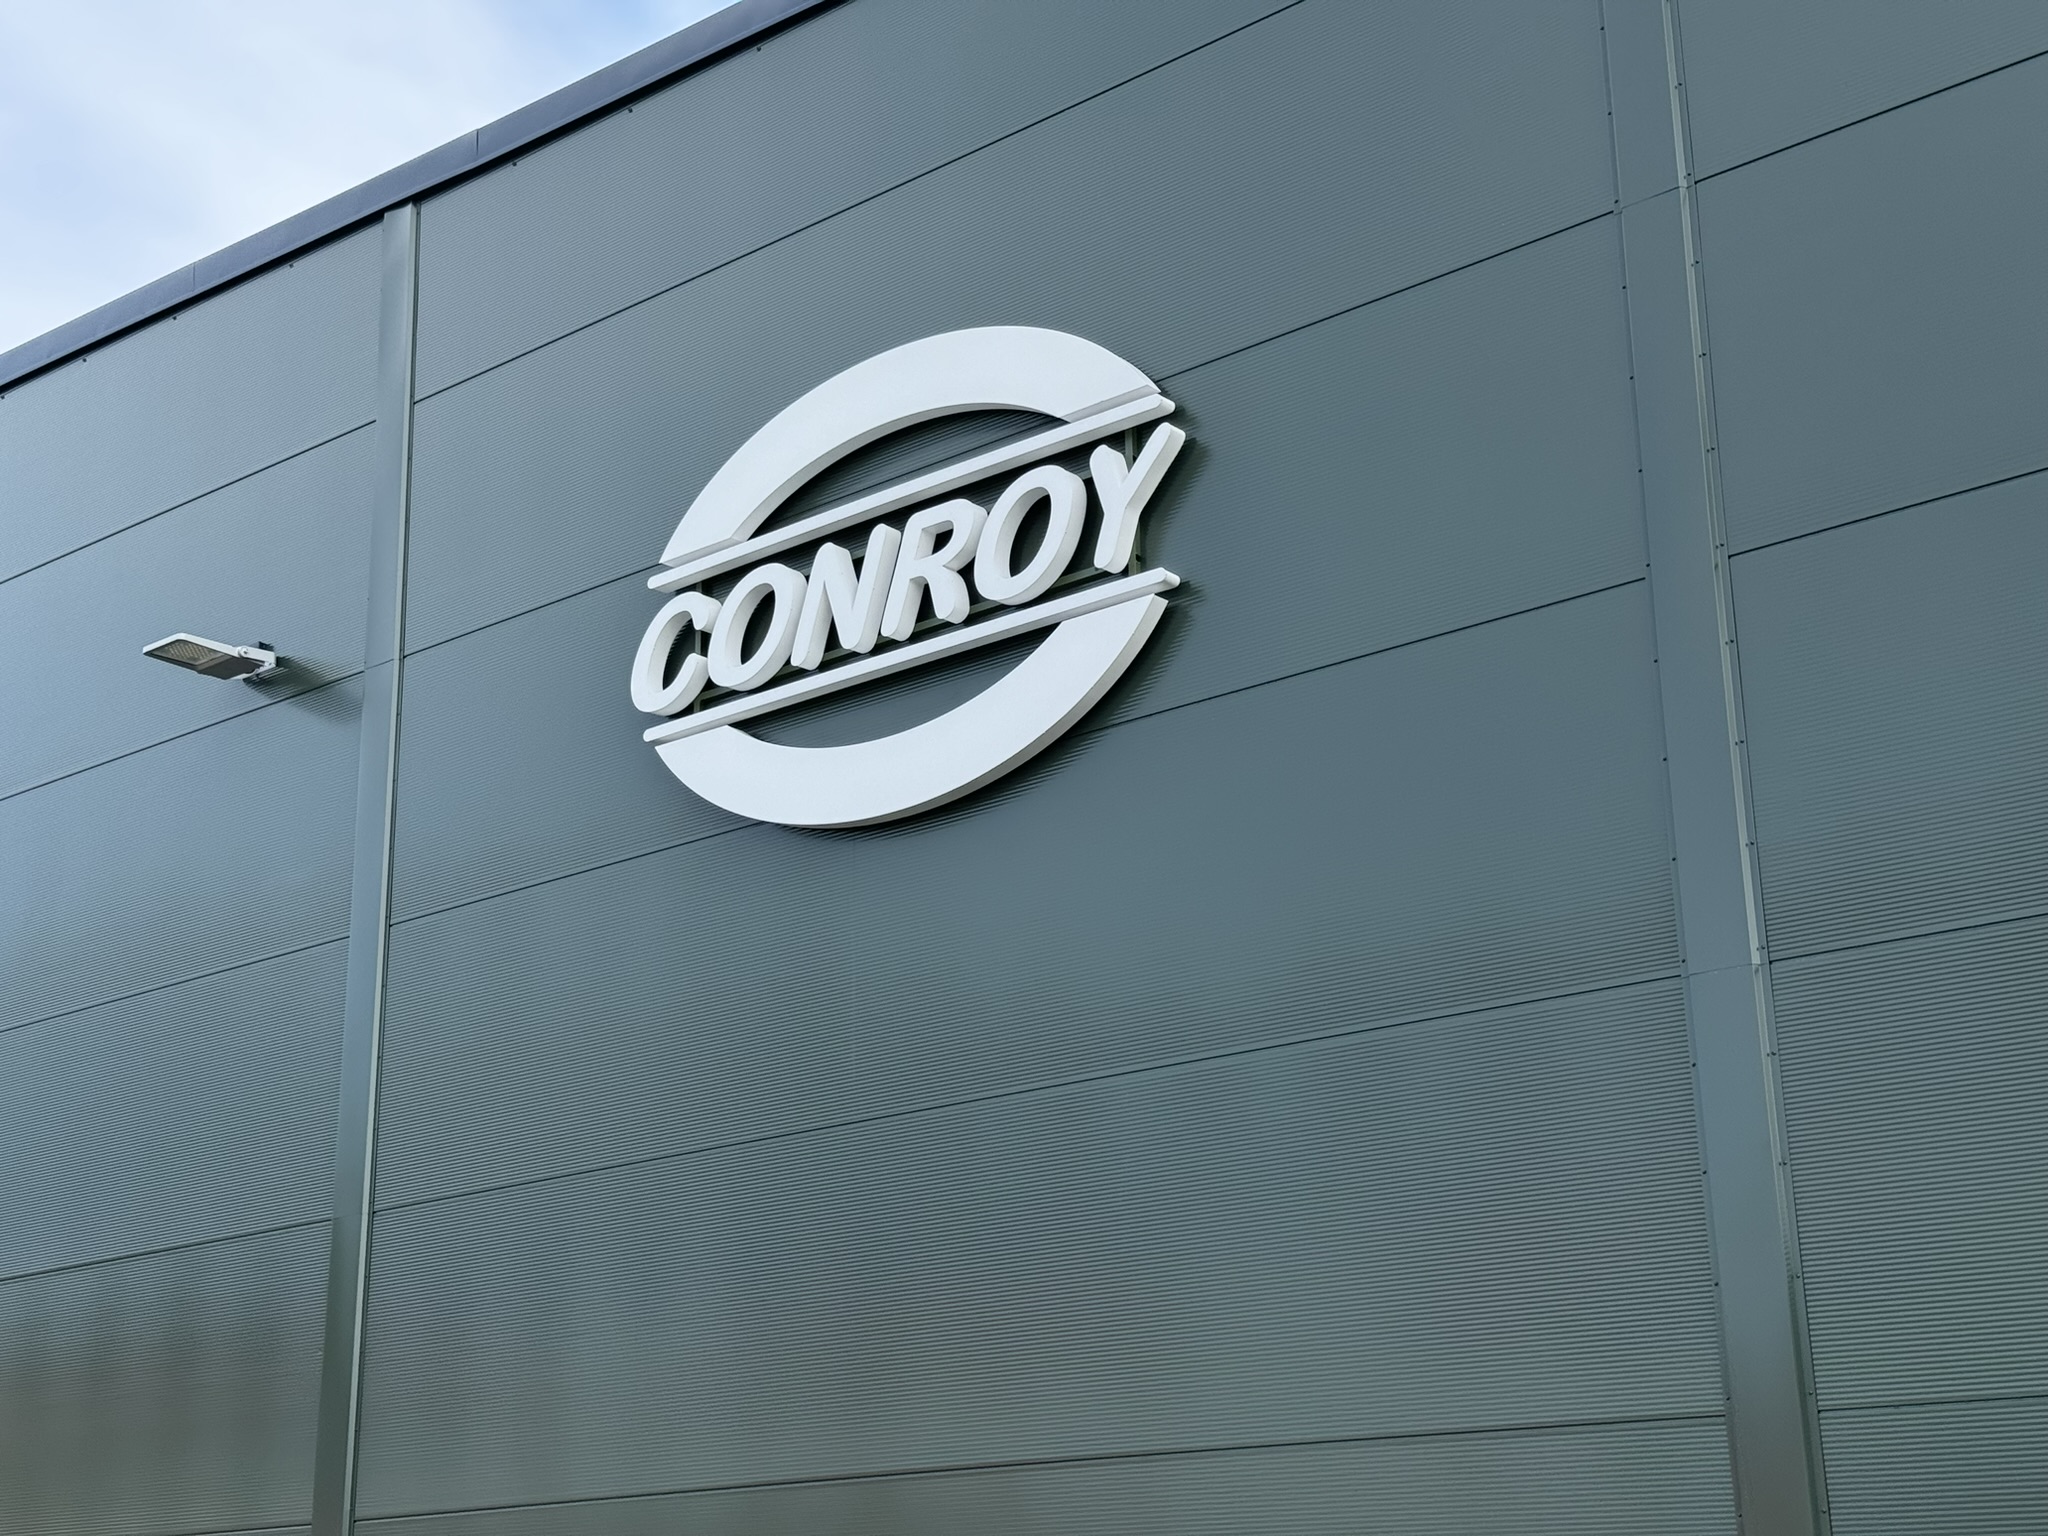 A sign depicting the logo of Conroy Medical on the side of a building